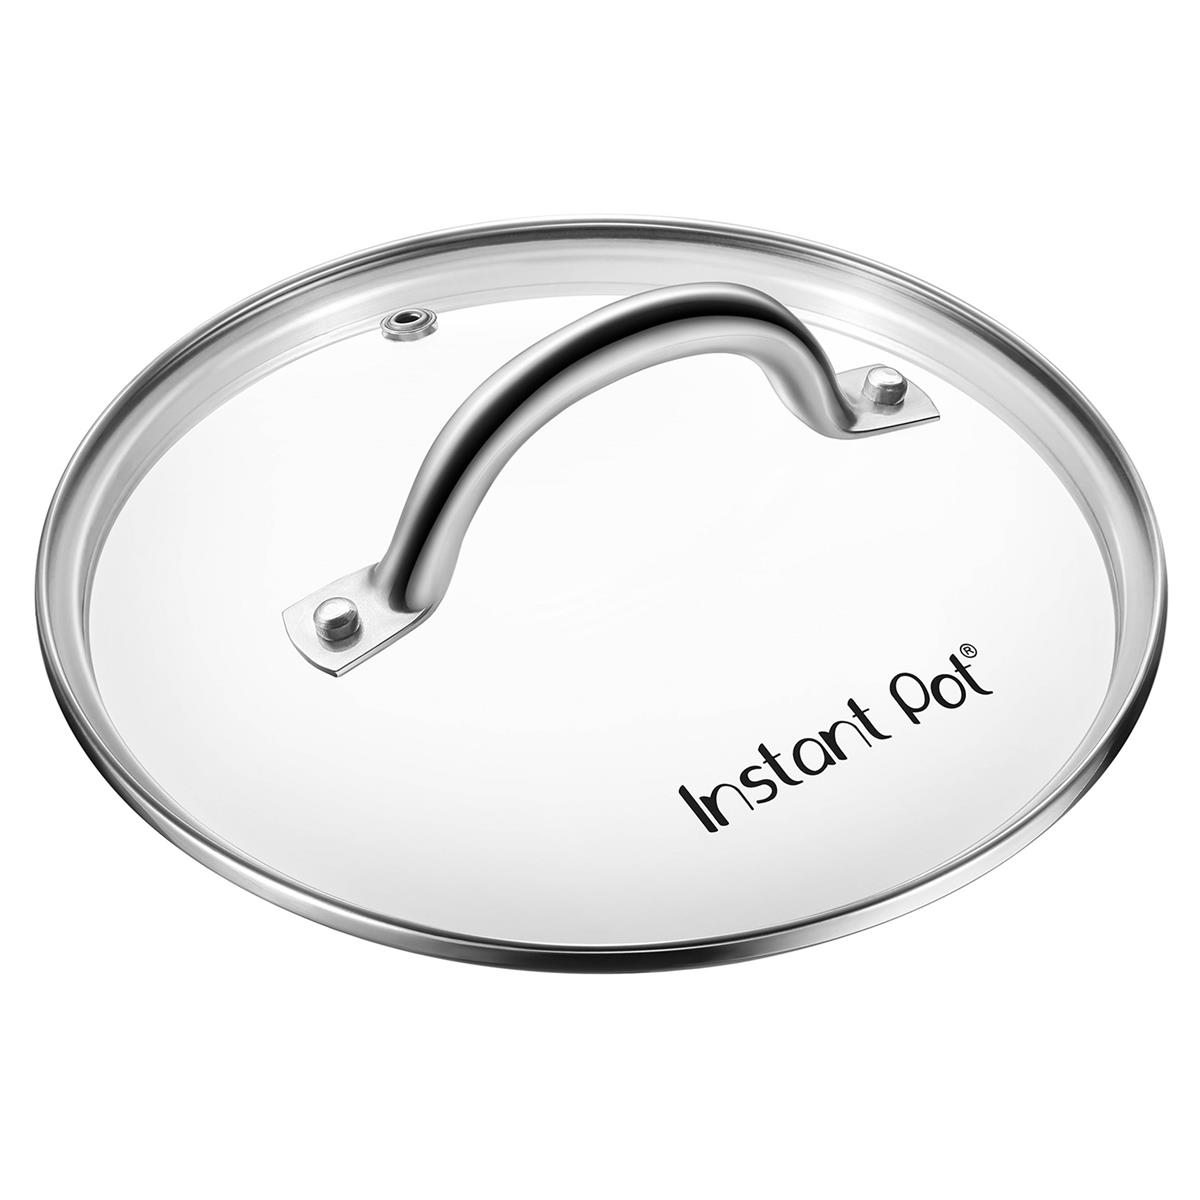 ® - glass lid with steam valve for all 5.7 liter models